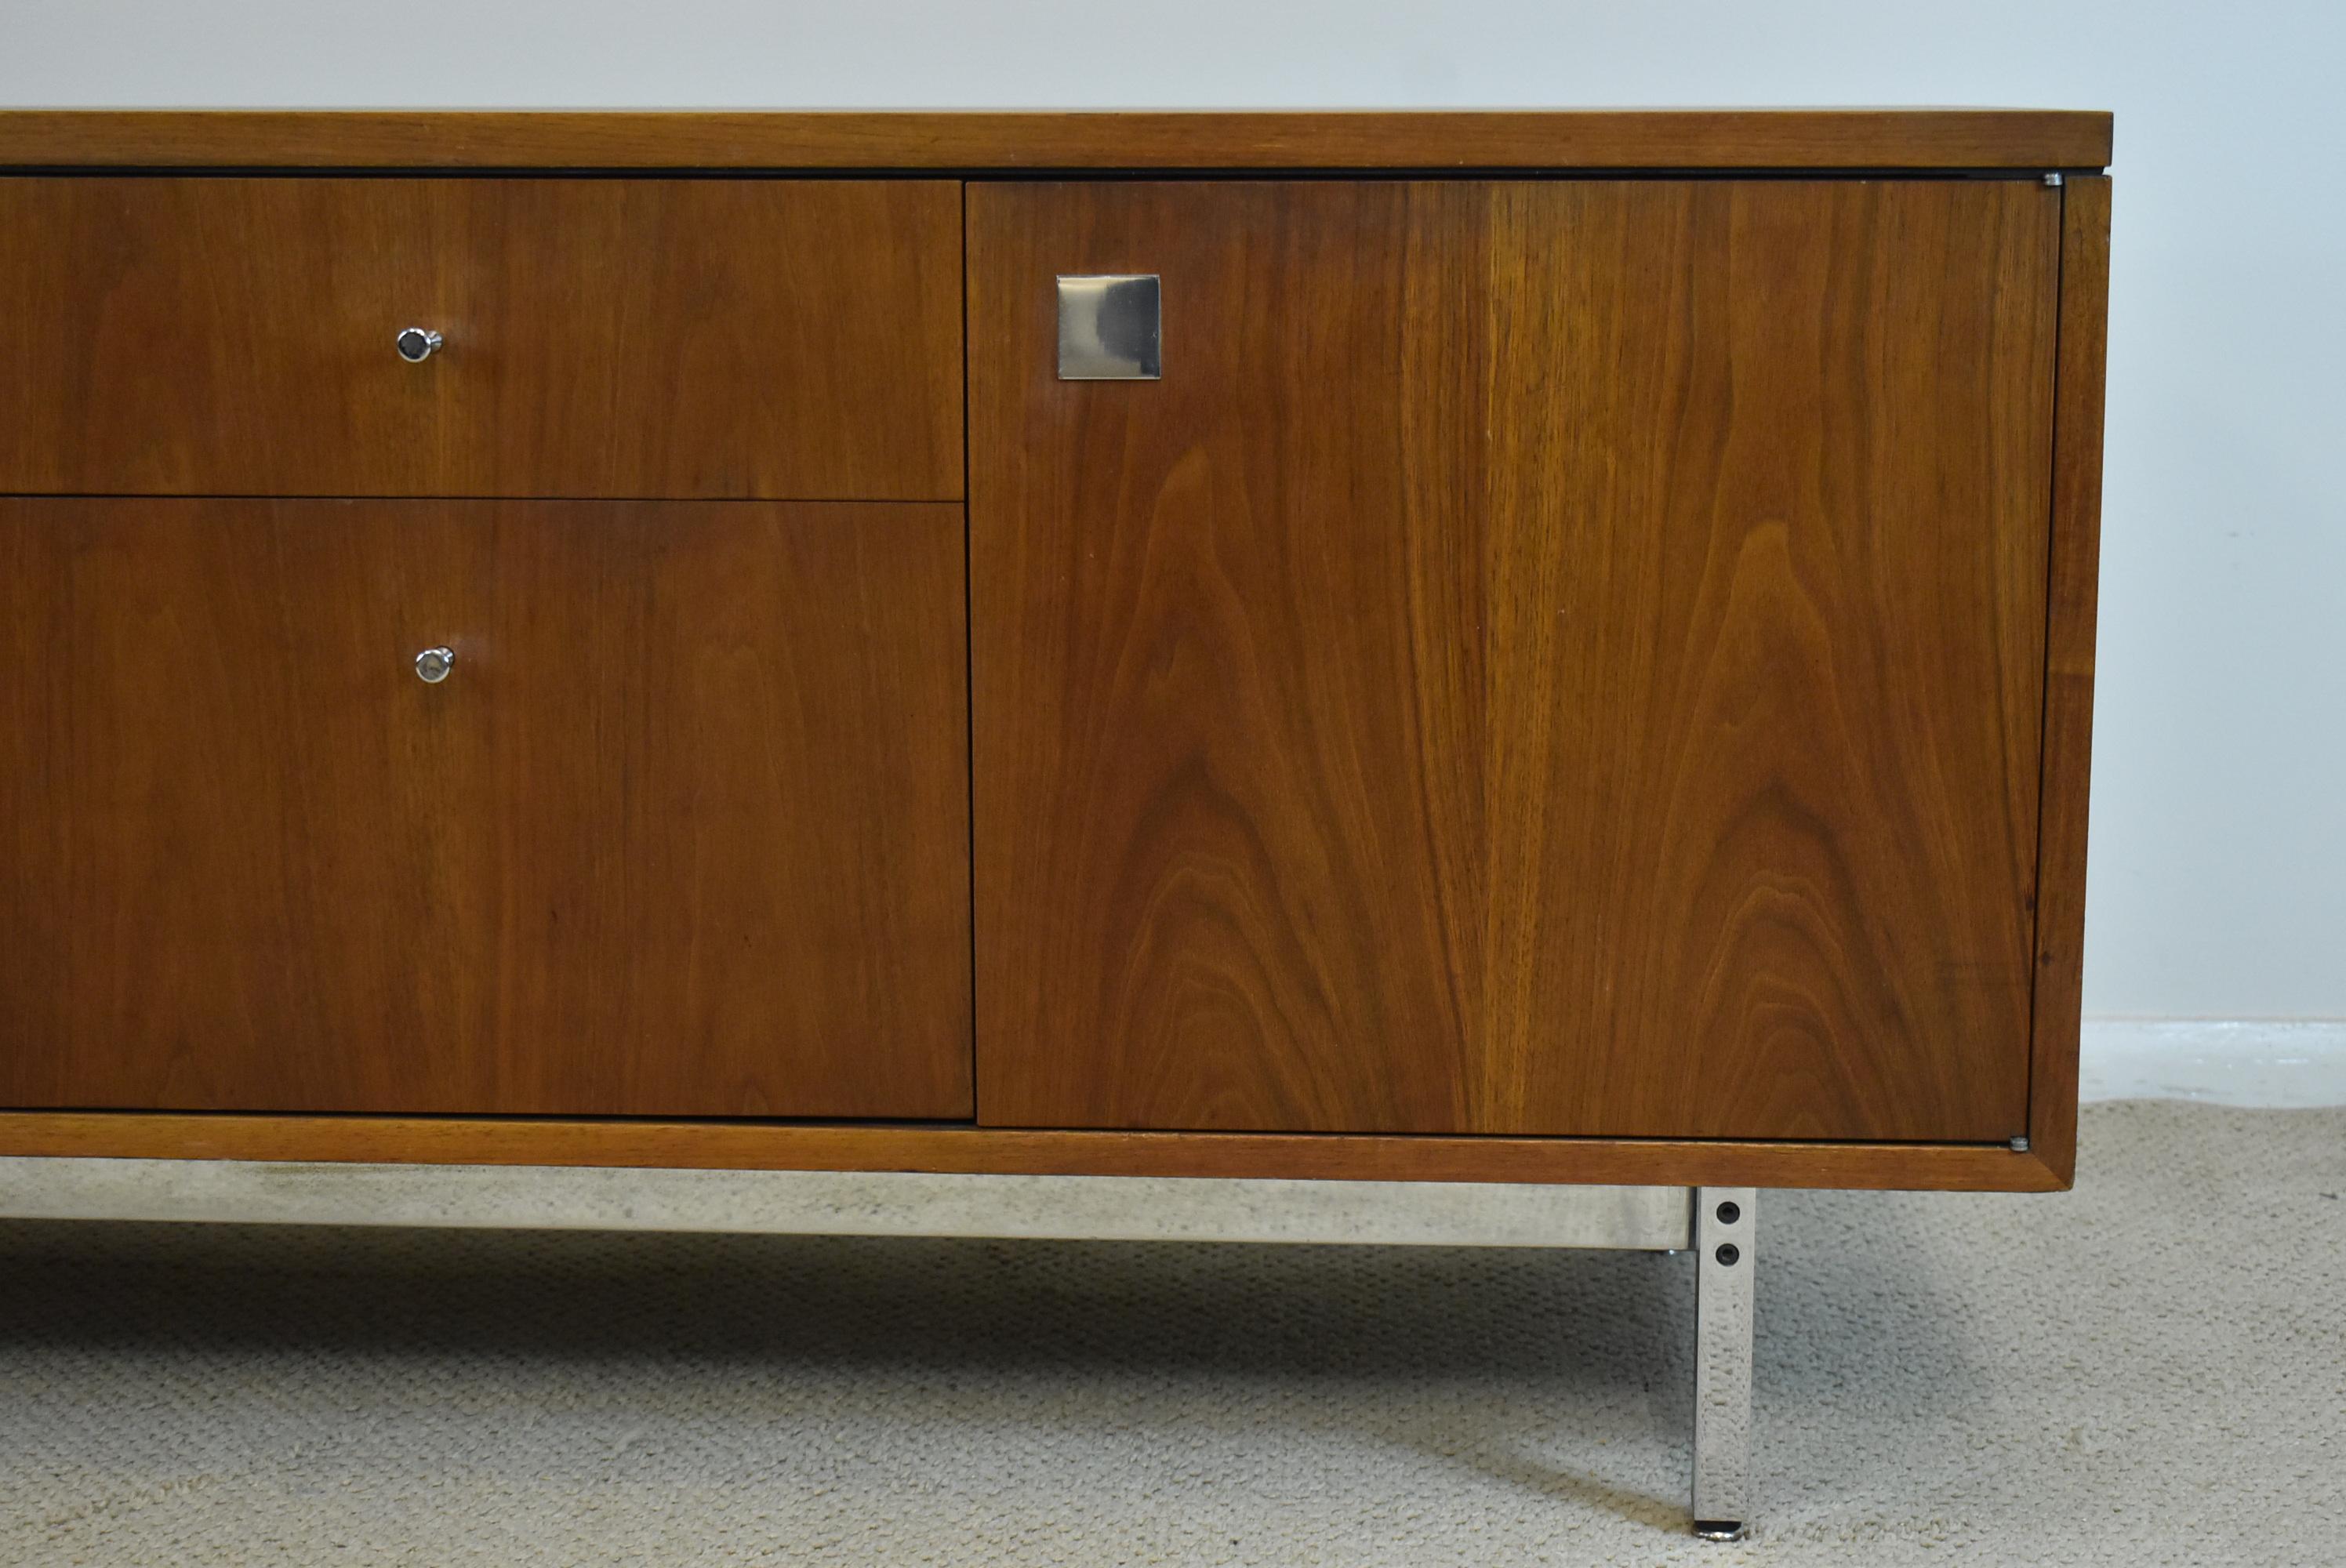 Mid Century Modern Charles Eames for Herman Miller walnut credenza. Chrome square tubular frame and legs. Two doors and four drawers. Drawers have hidden inside key locks. File cabinet. Very nice condition. Holes have been drilled in the bottom of